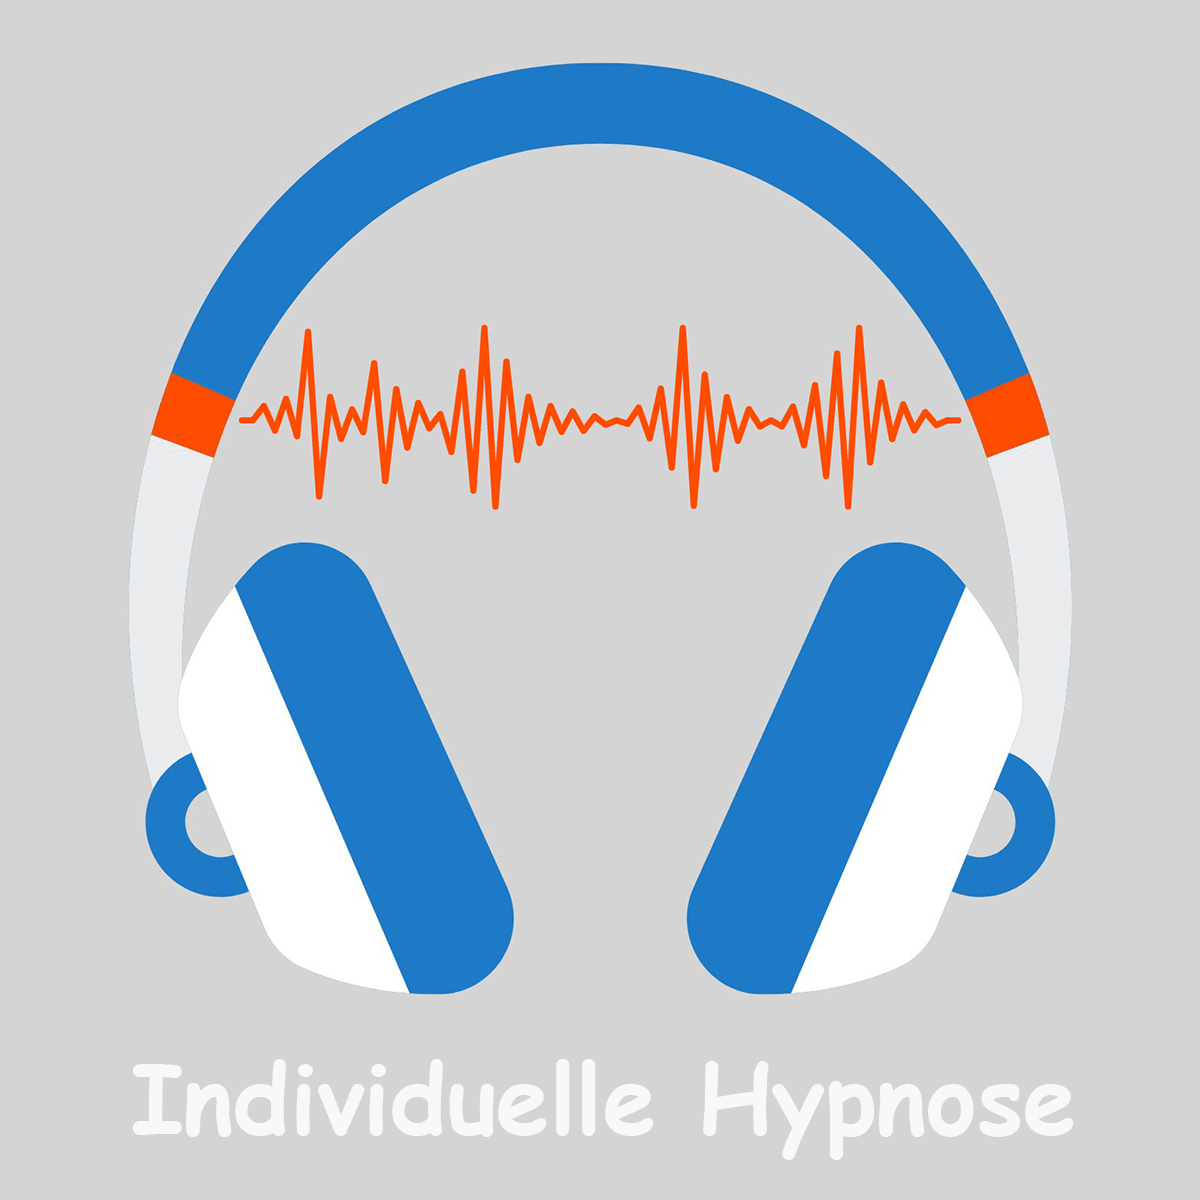 Hypnose download | Individuelle Hypnose